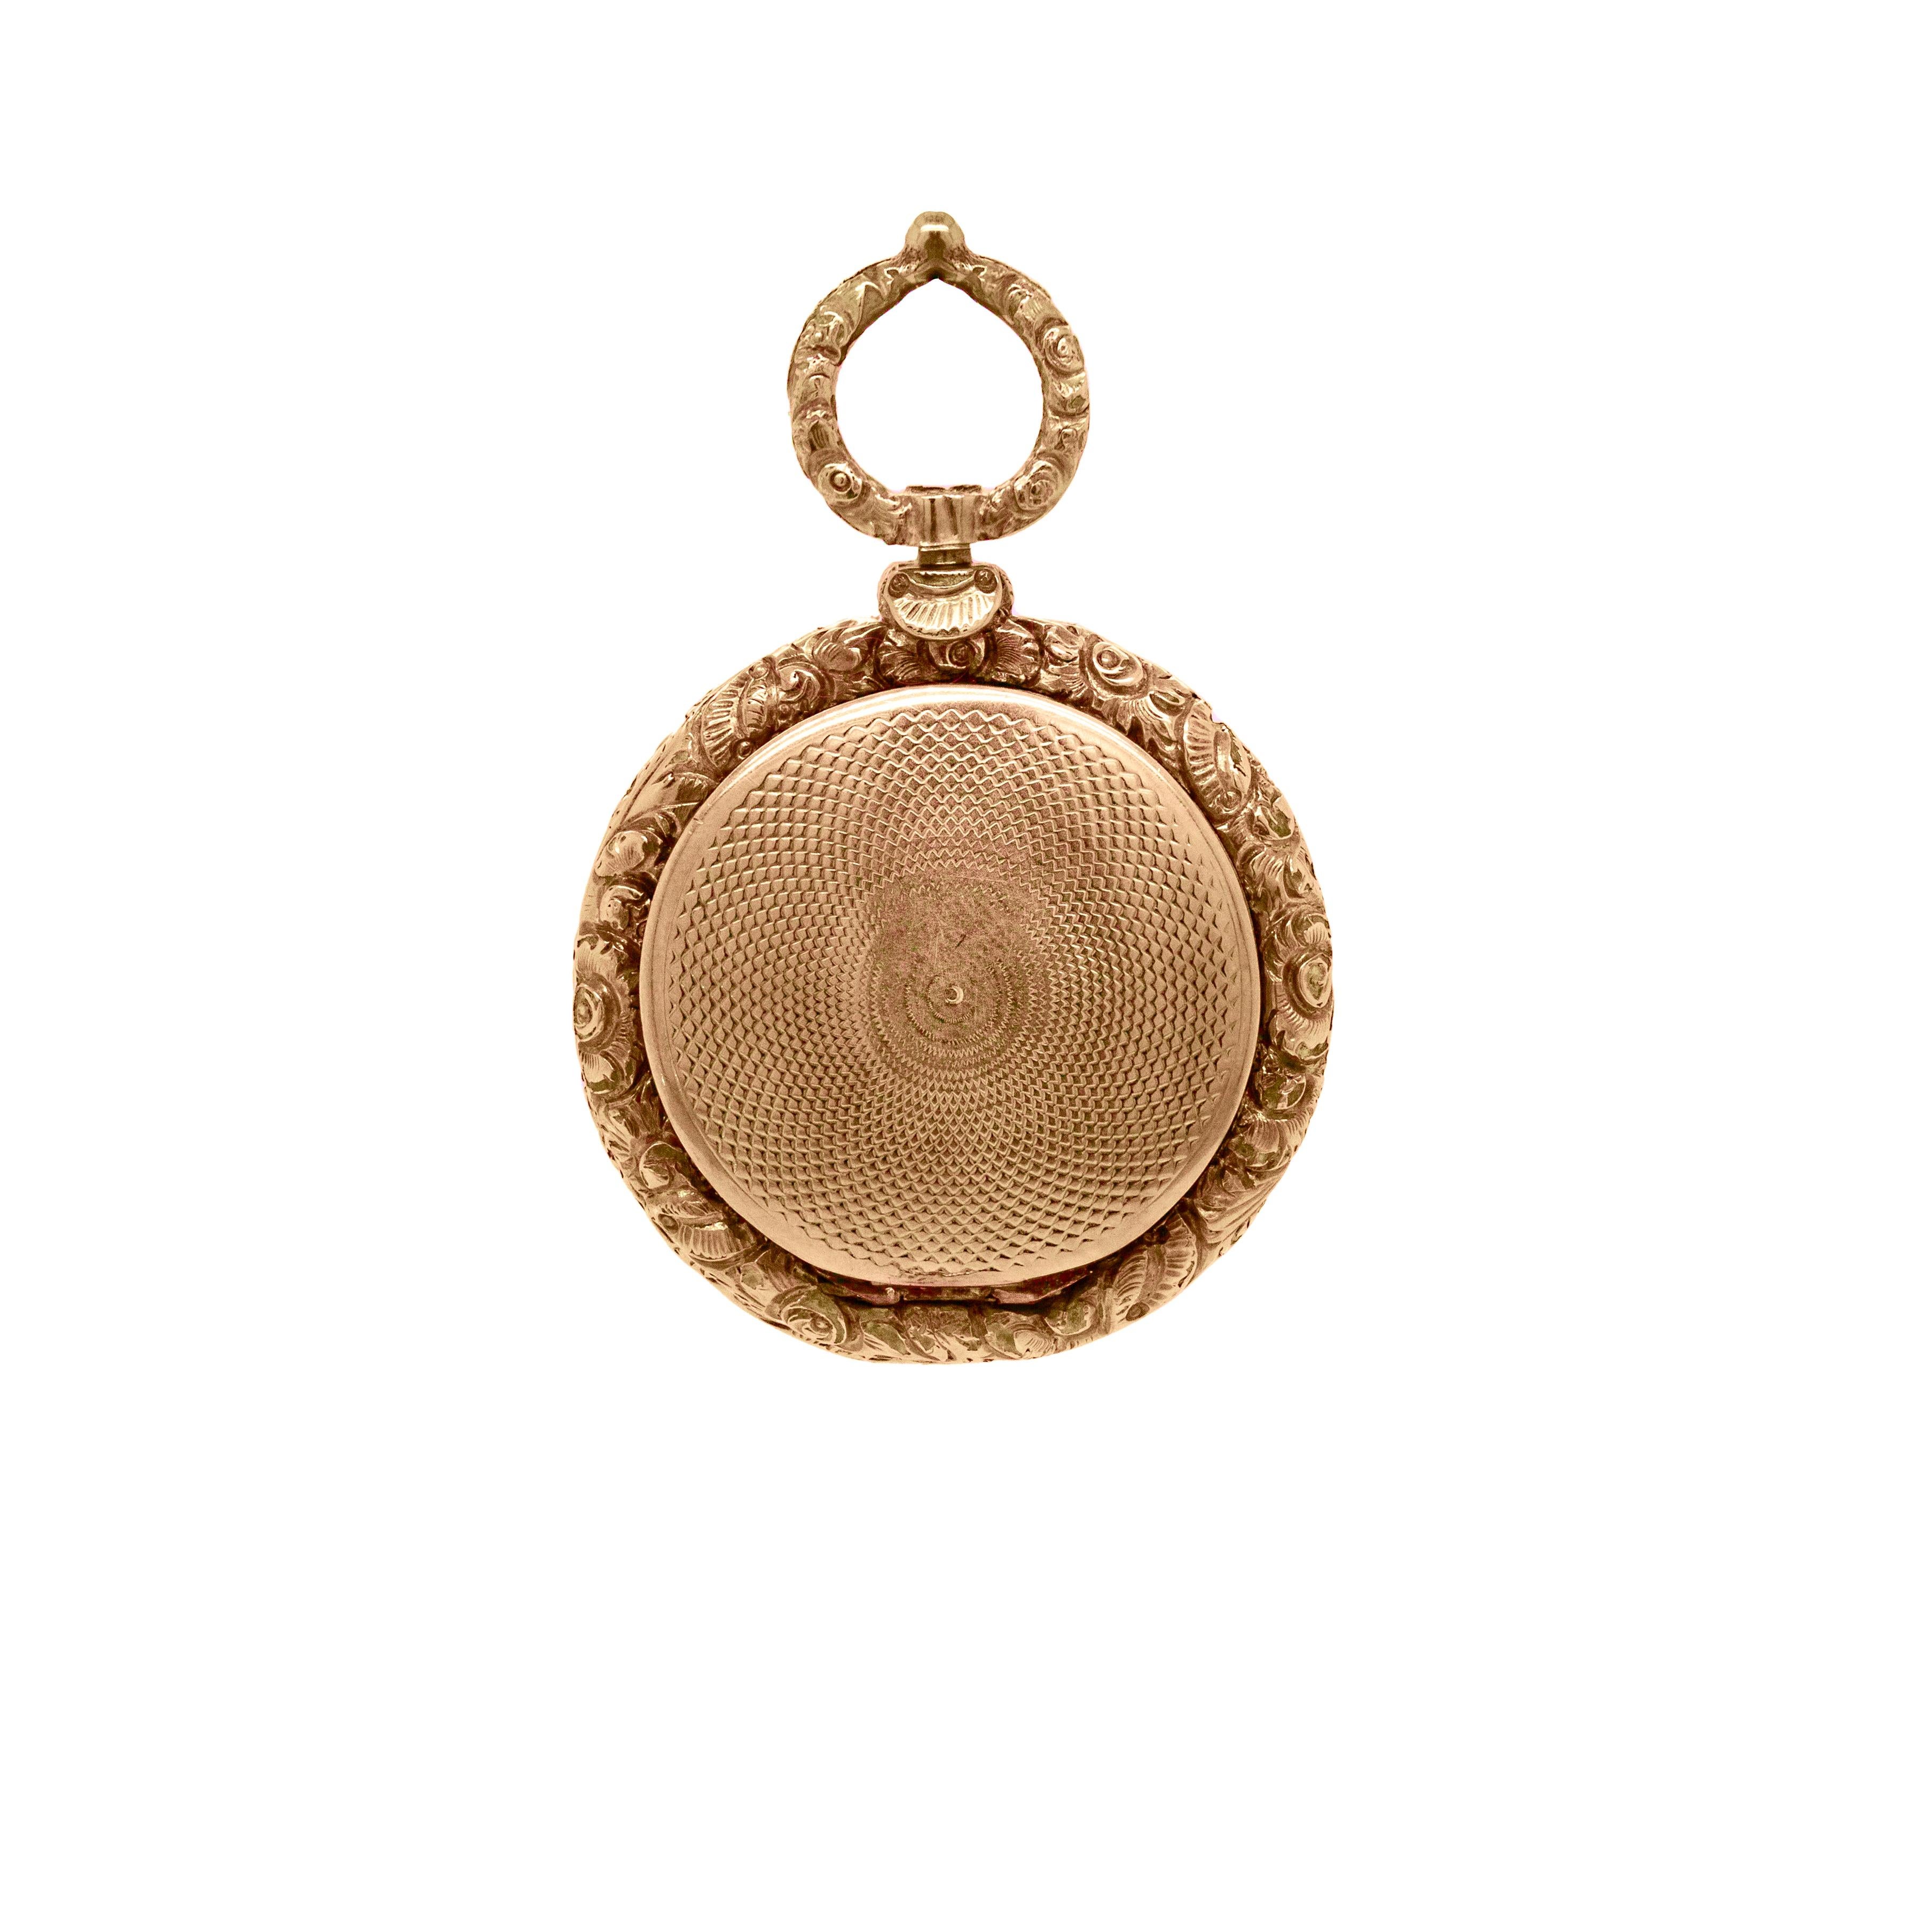 Try to go back in time to the Early Victorian era and imagine how many wonderful stories this spectacular piece has to tell.

Meticulously crafted in 10 carat yellow gold, this ornate vinaigrette locket features a deeply hand carved floral frame and